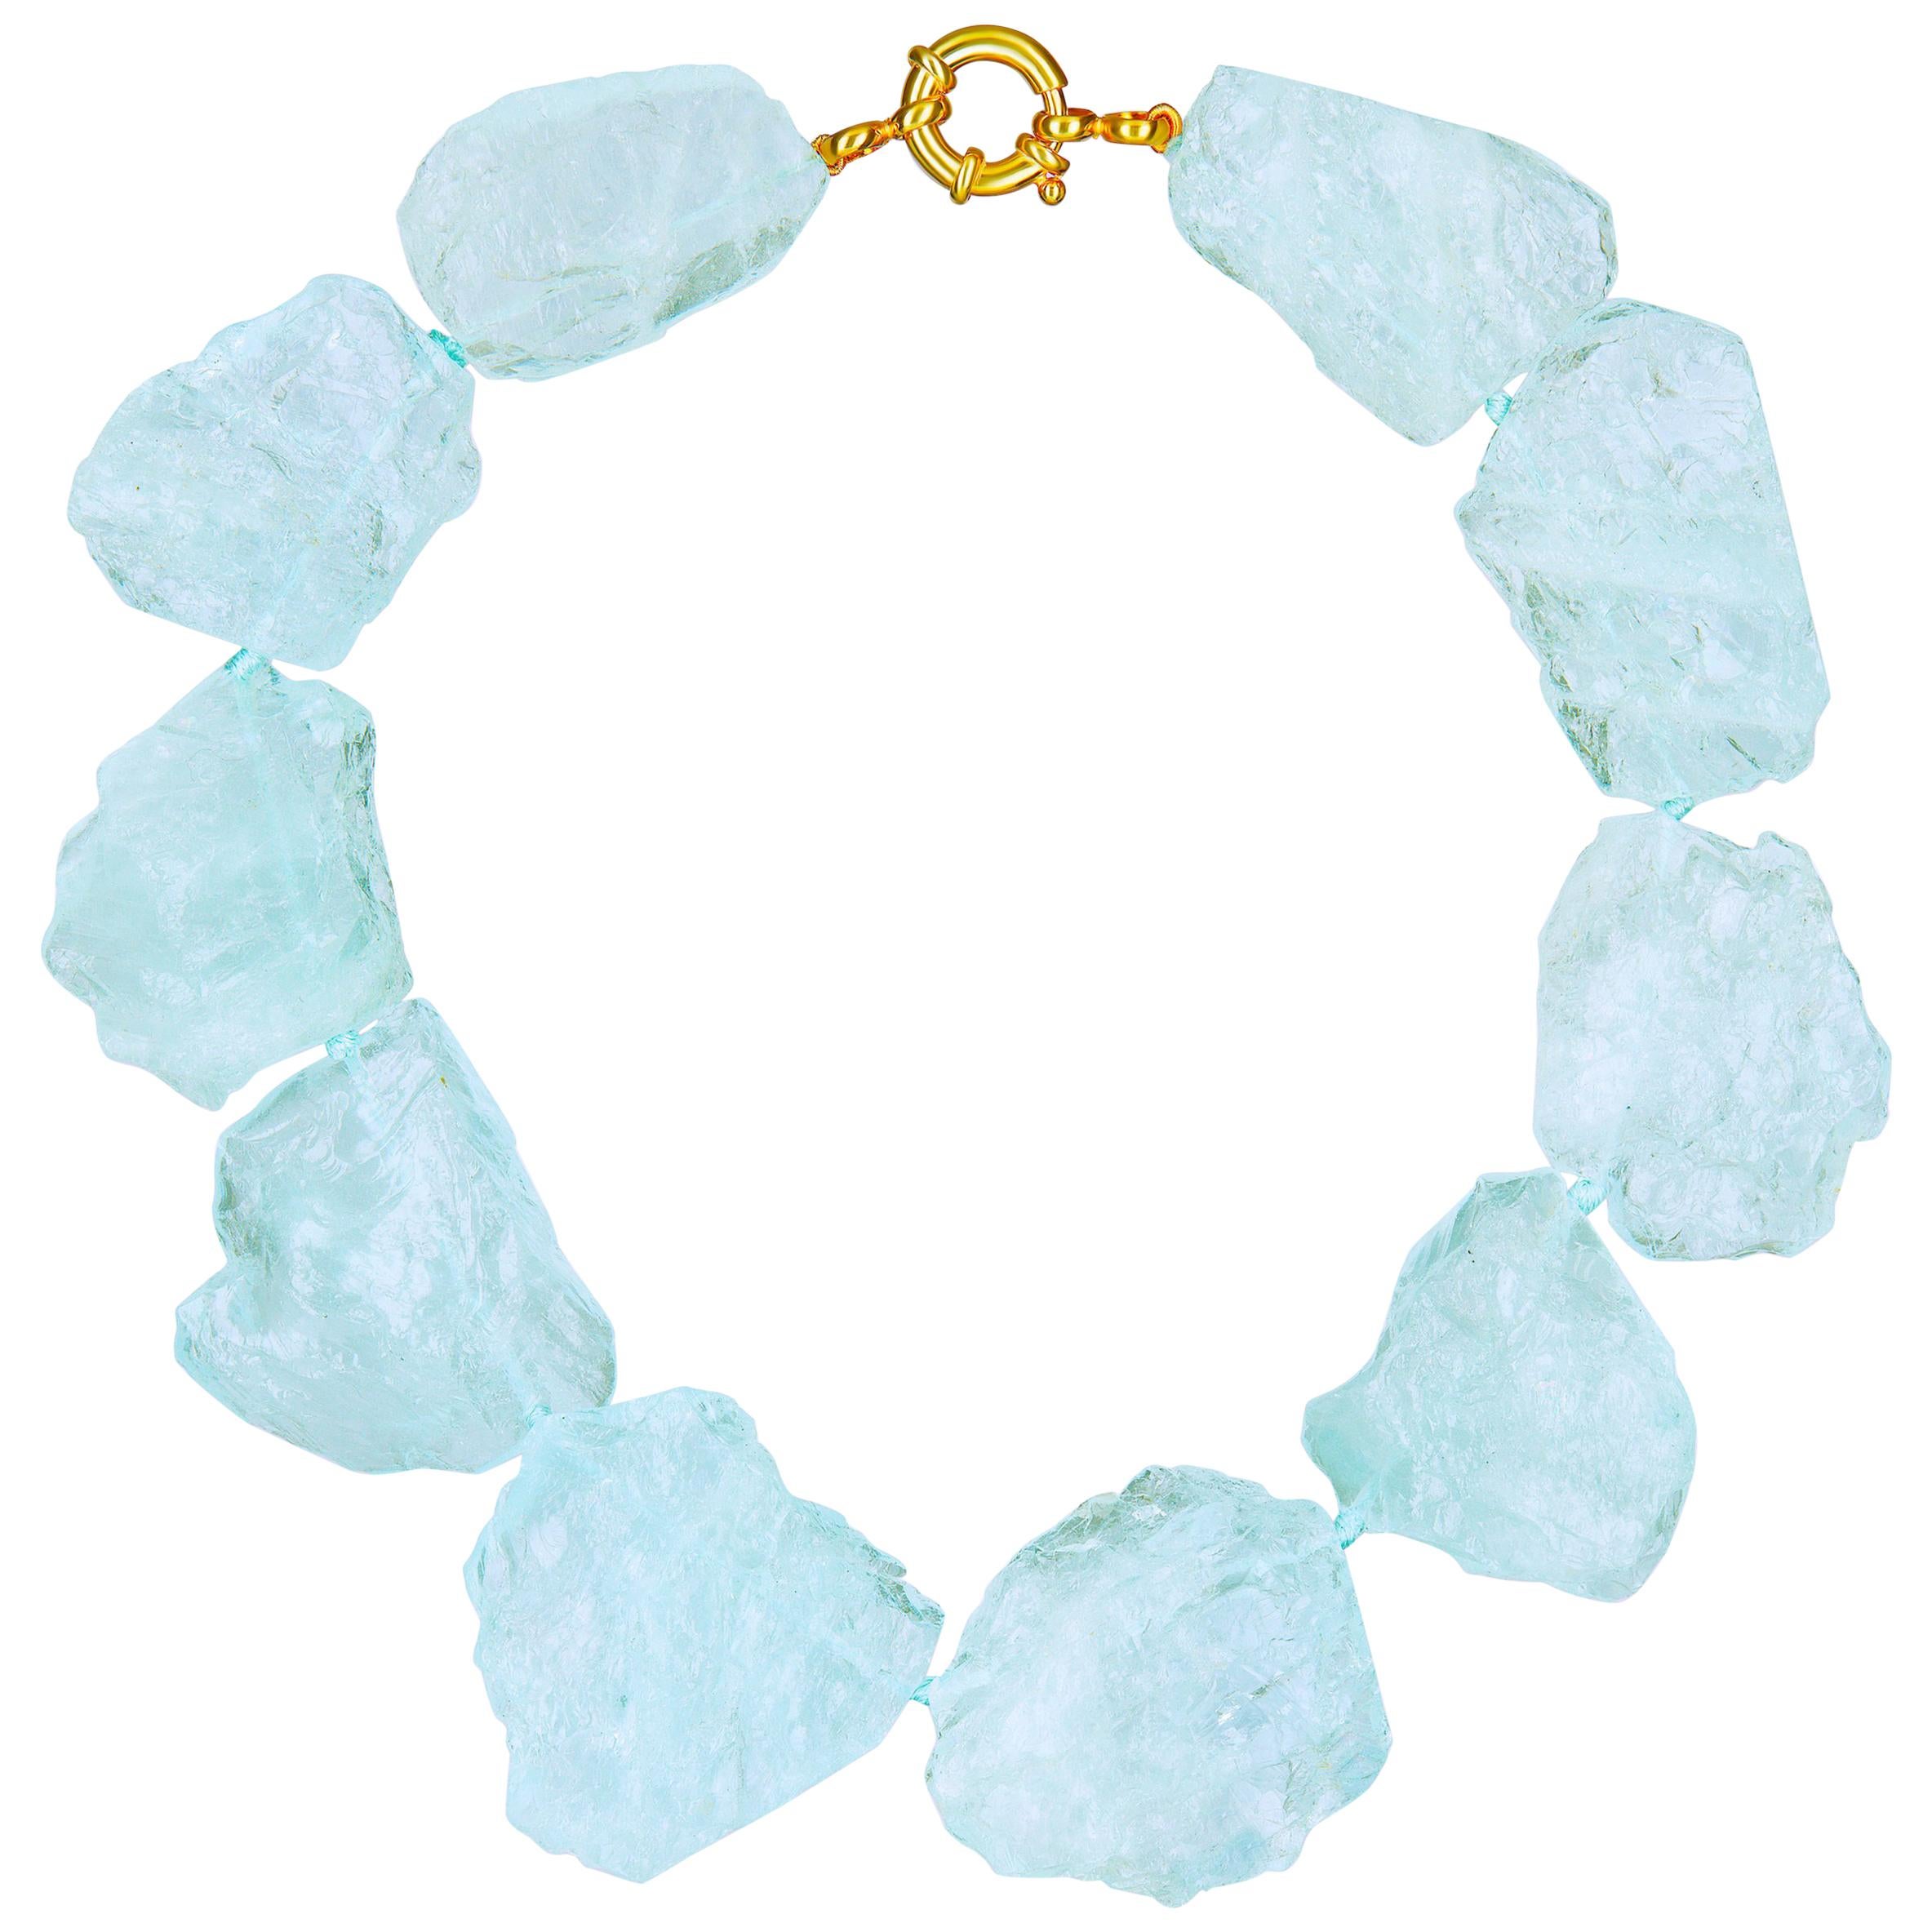 1, 446.50 Carats of Carved Sky Blue Aquamarine Statement Necklace